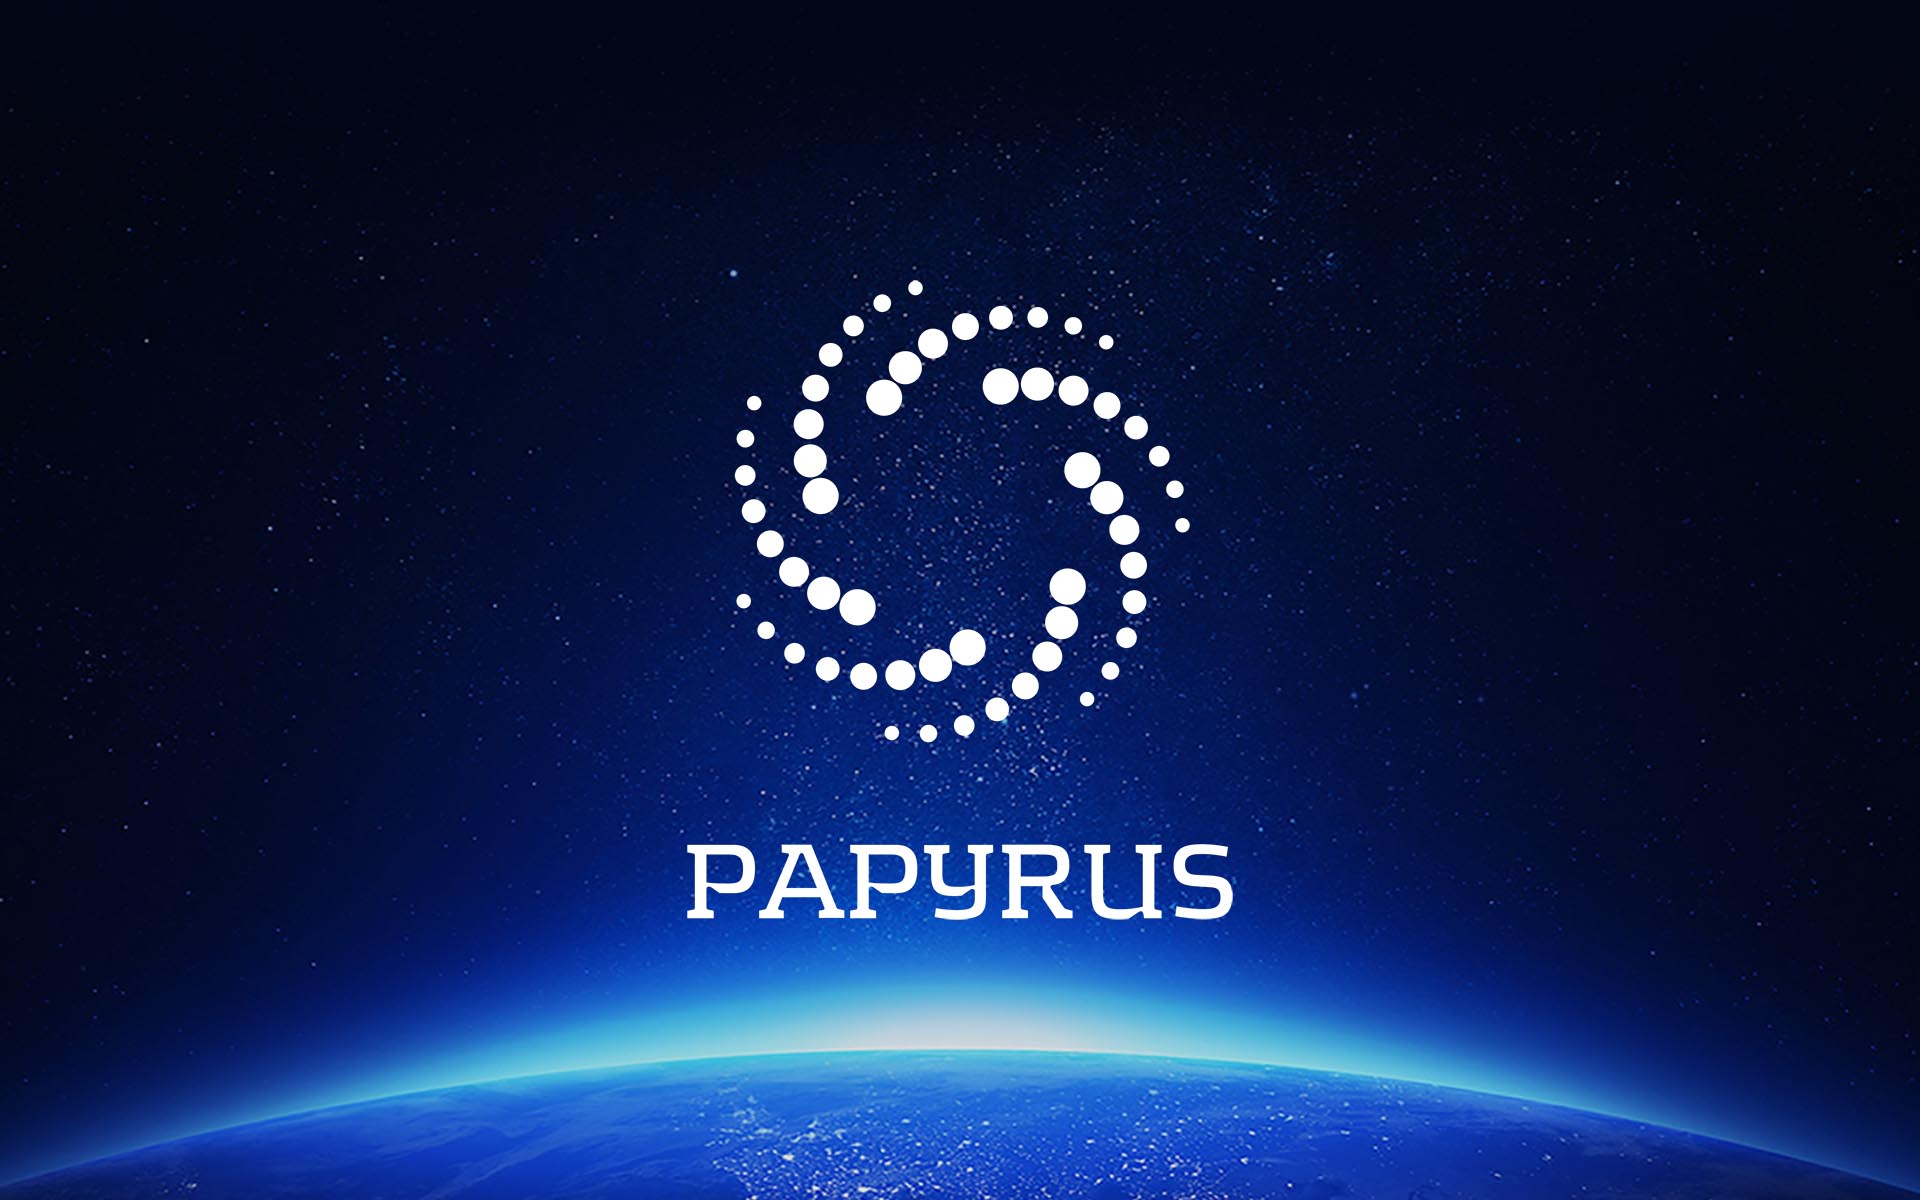 Decentralized Advertising Ecosystem Papyrus Launches Token Sale on October 12, Announces Strategic Partnership with Airpush, Bancor, WINGS, and BitClave, and Presents World-Class Advisors